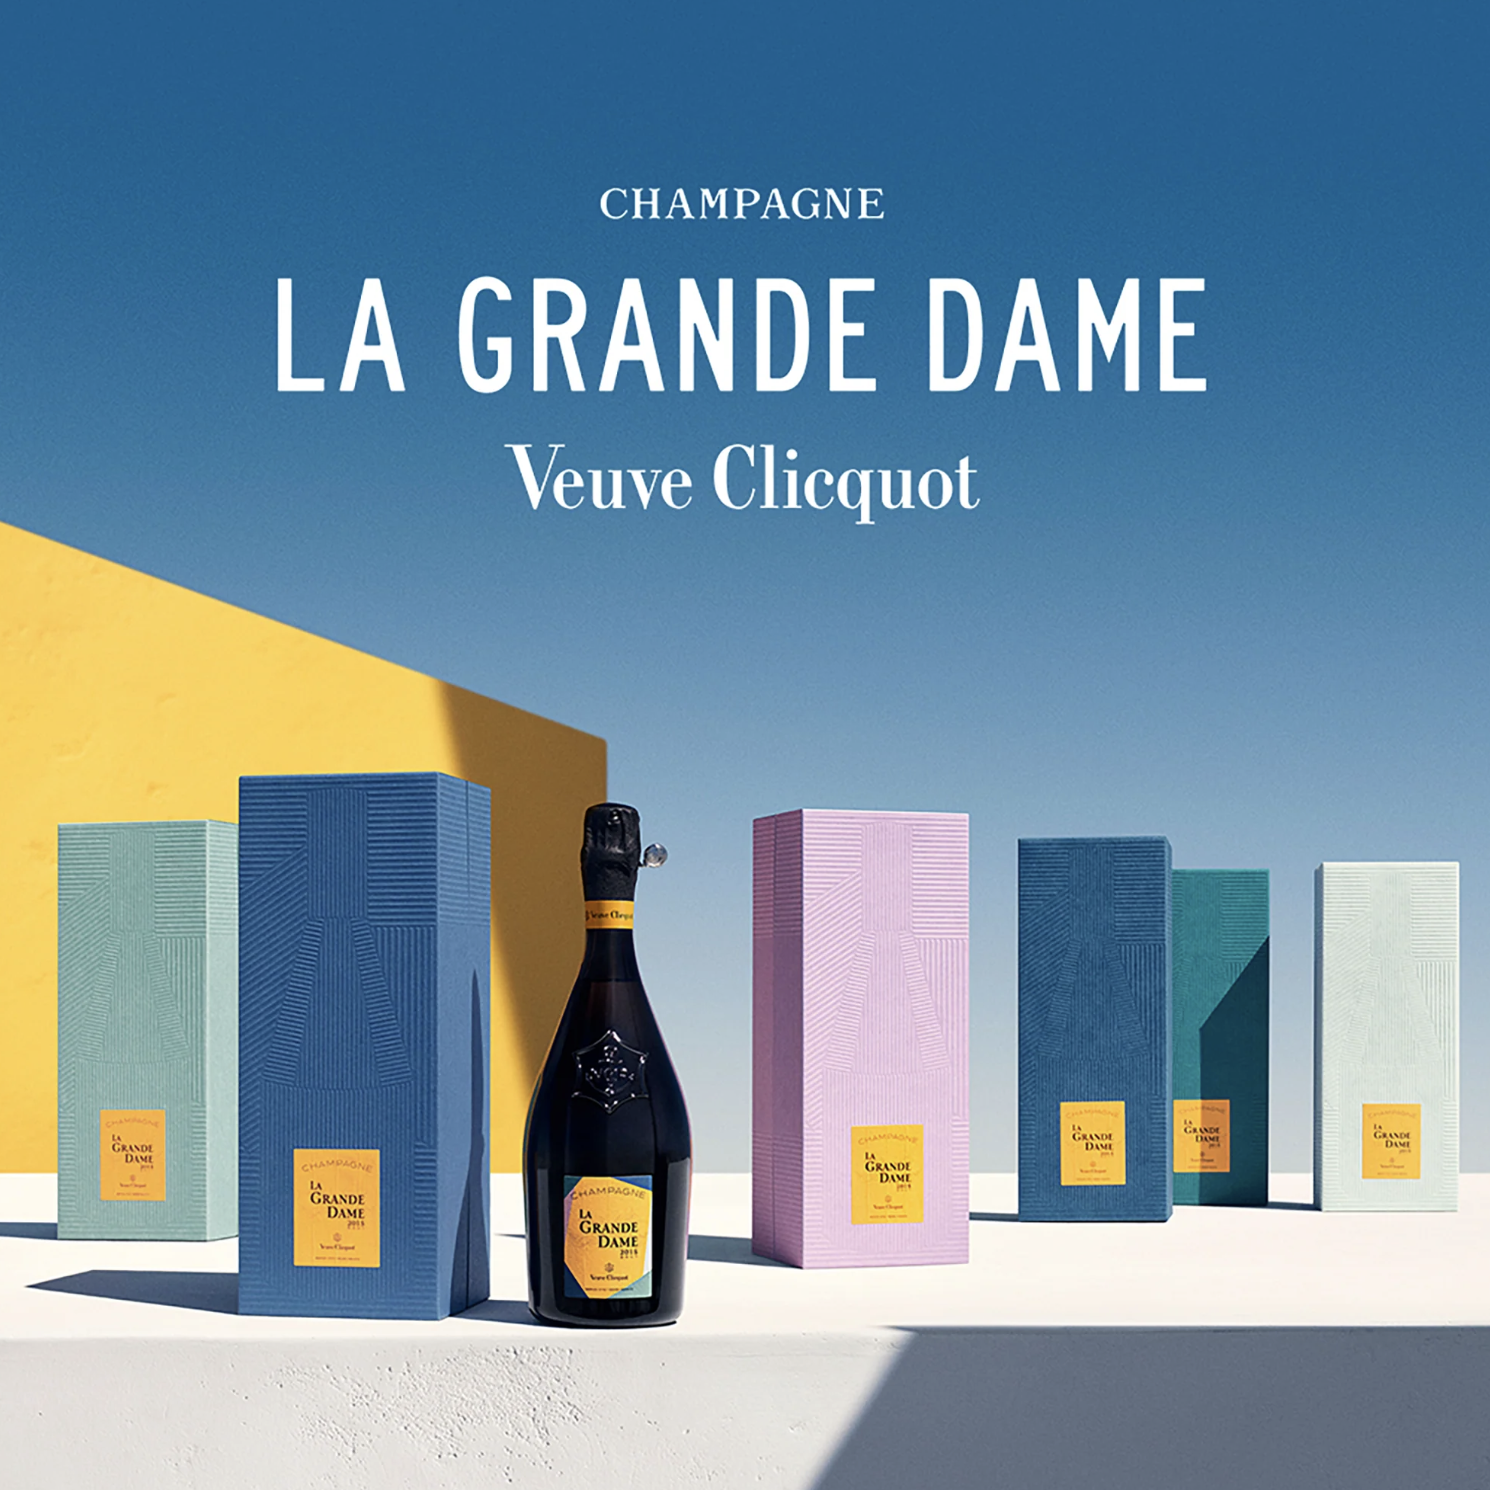 Veuve Clicquot La Grande Dame: Excellence and Legacy in Every Bottle